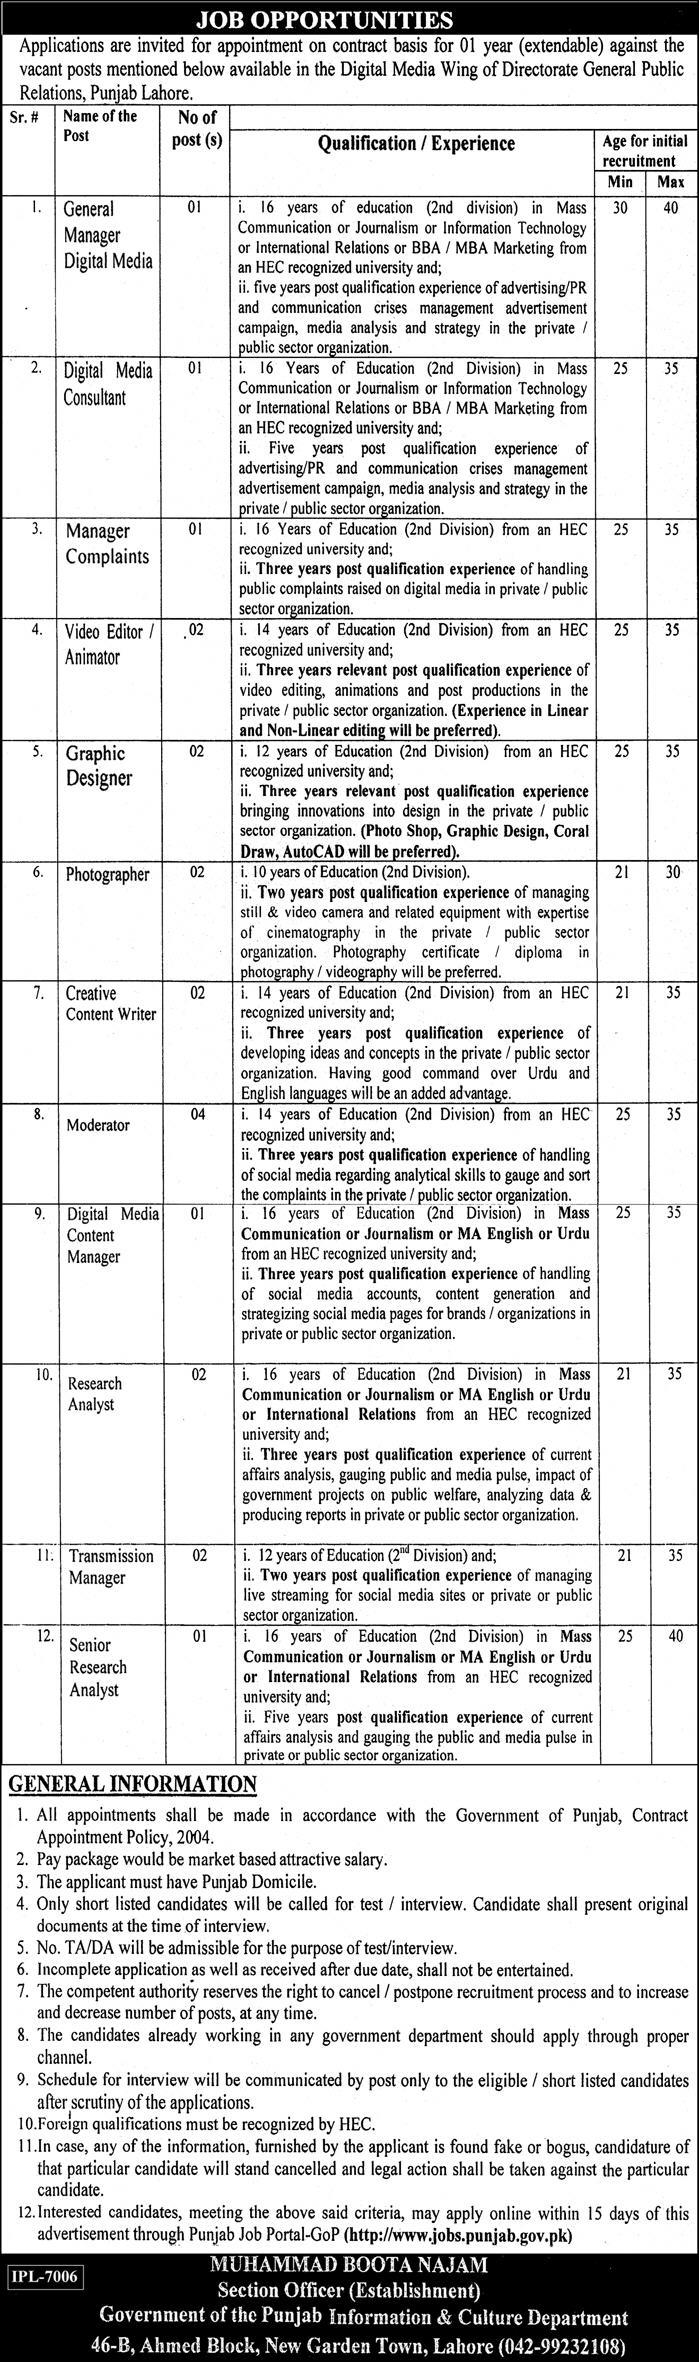 Information and Culture Department jobs 2019